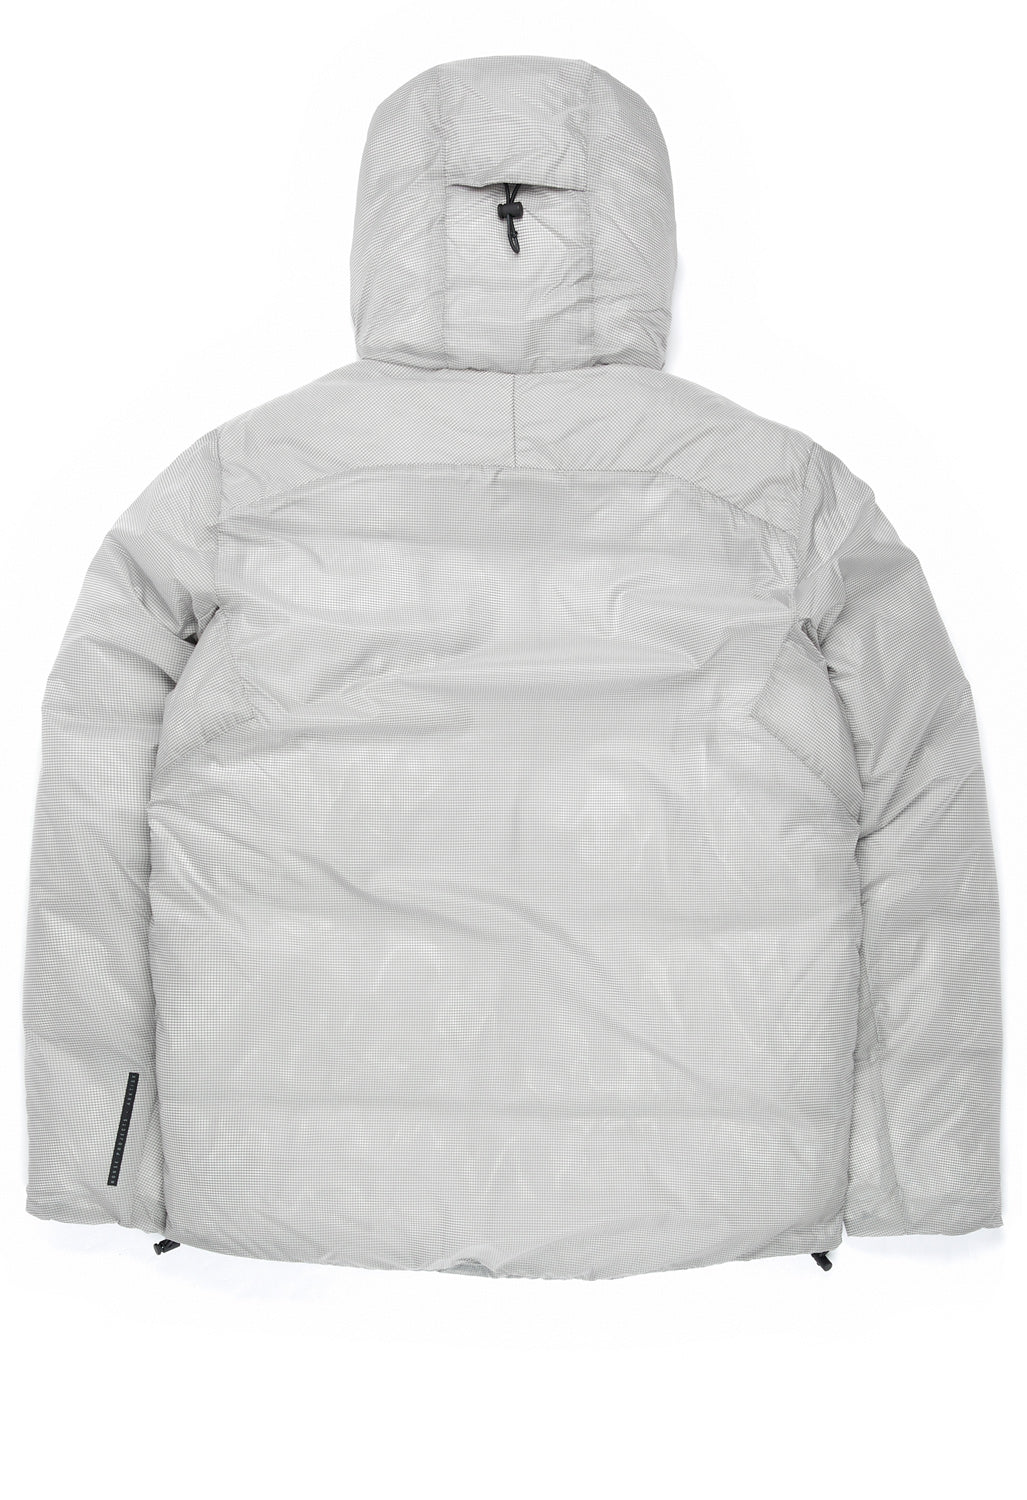 Pasmo Rip Short Down Parka - Lucid White